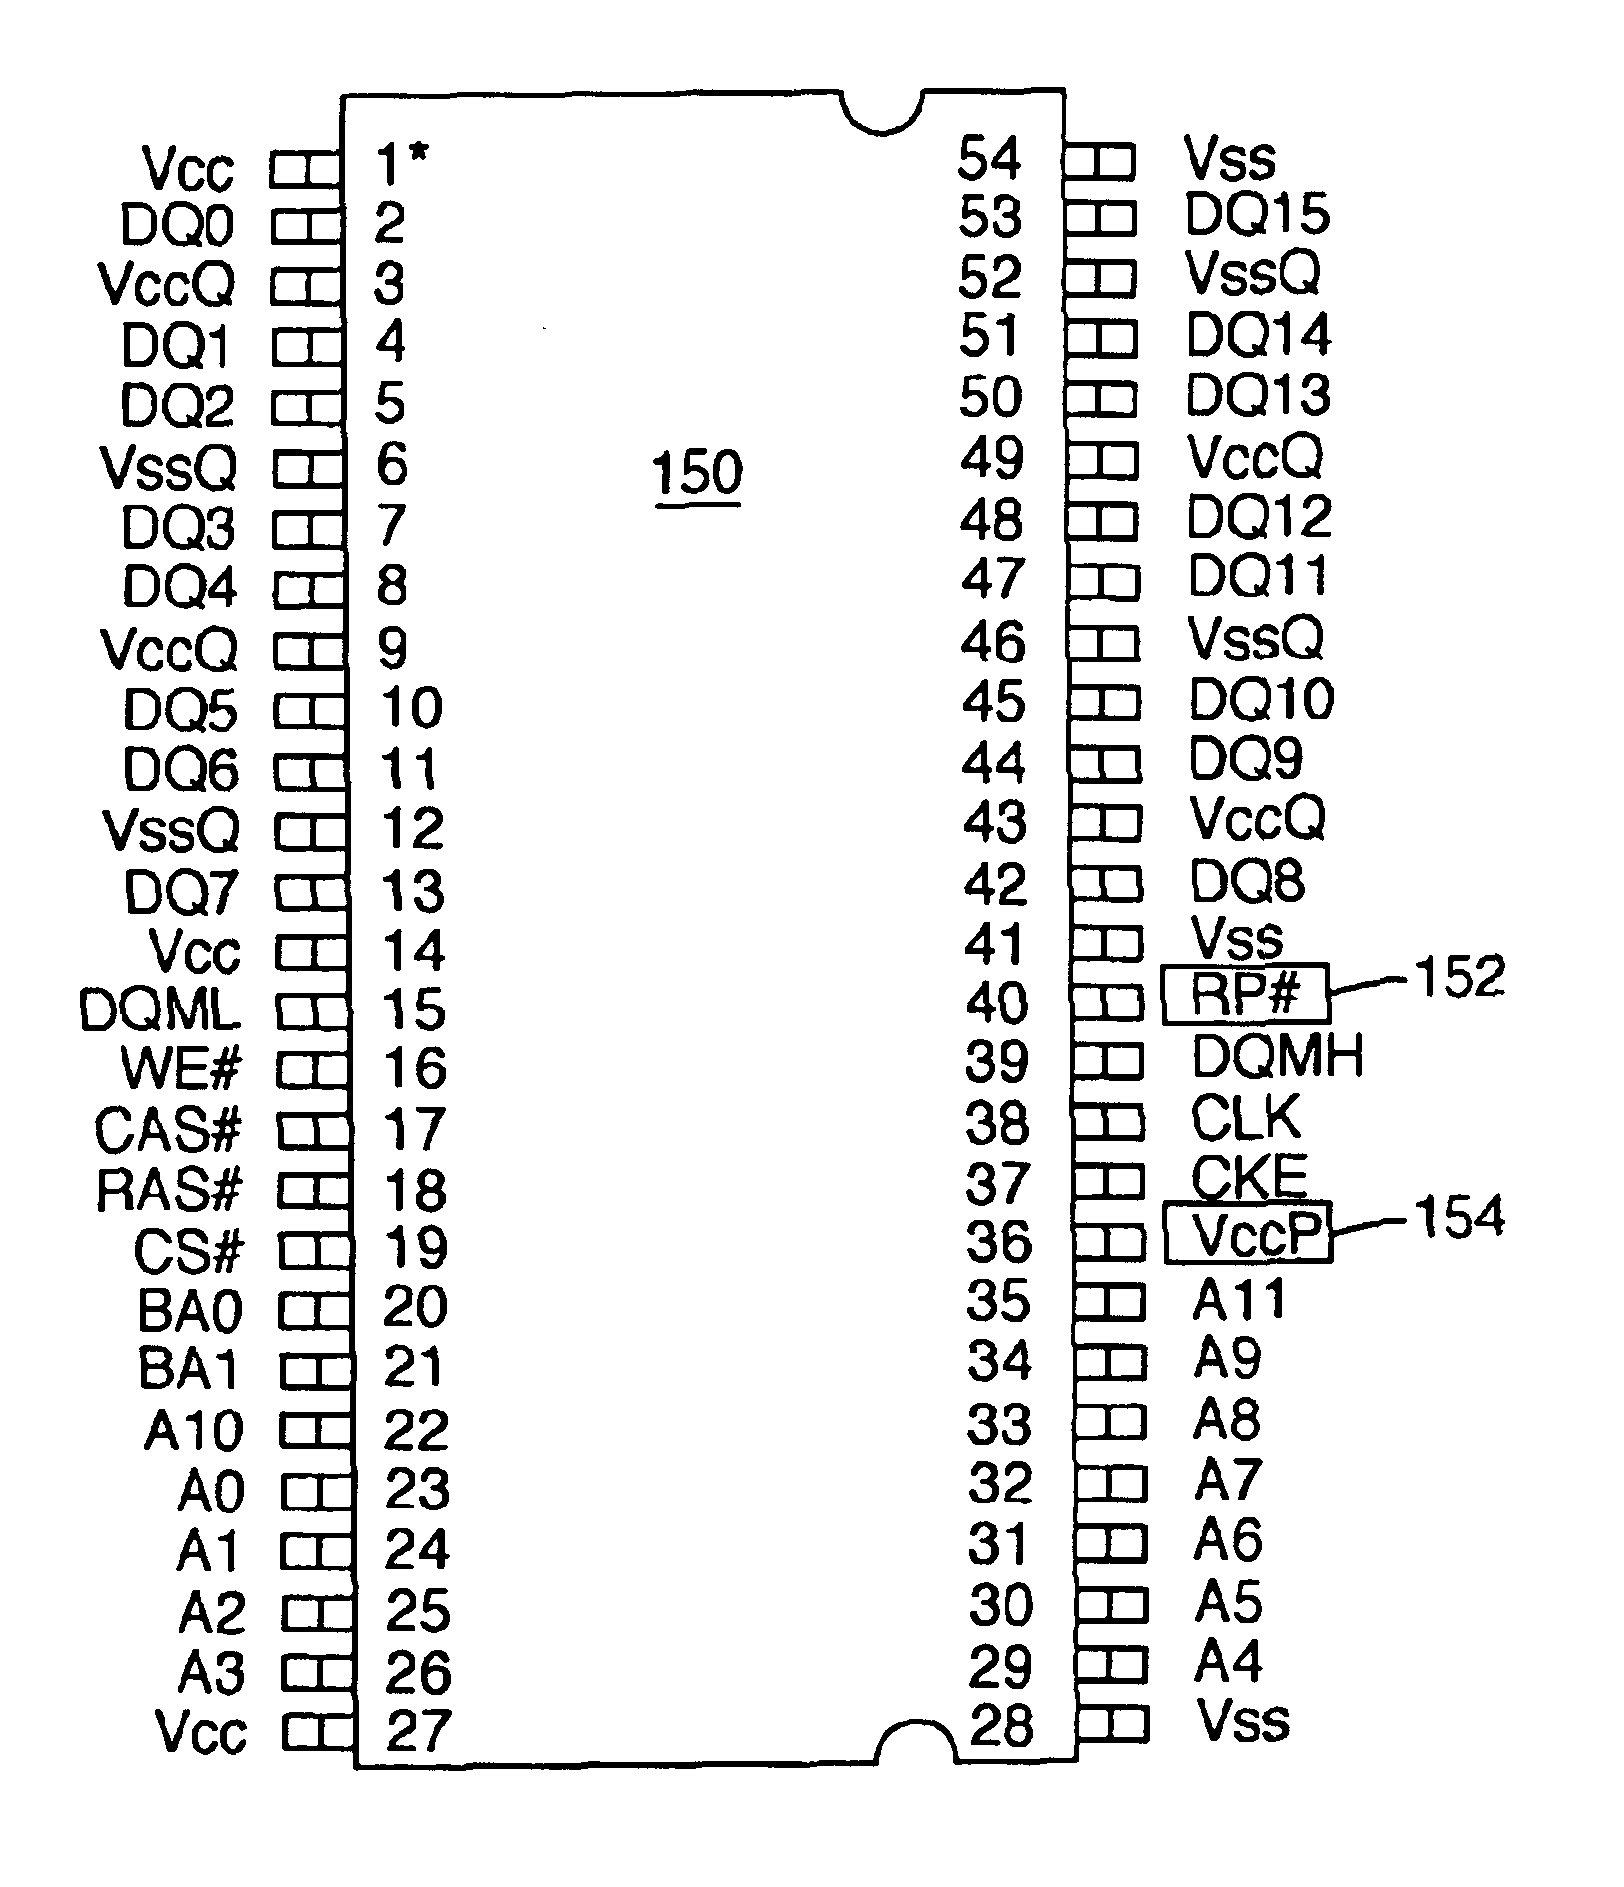 Synchronous flash memory emulating the pin configuration of SDRAM